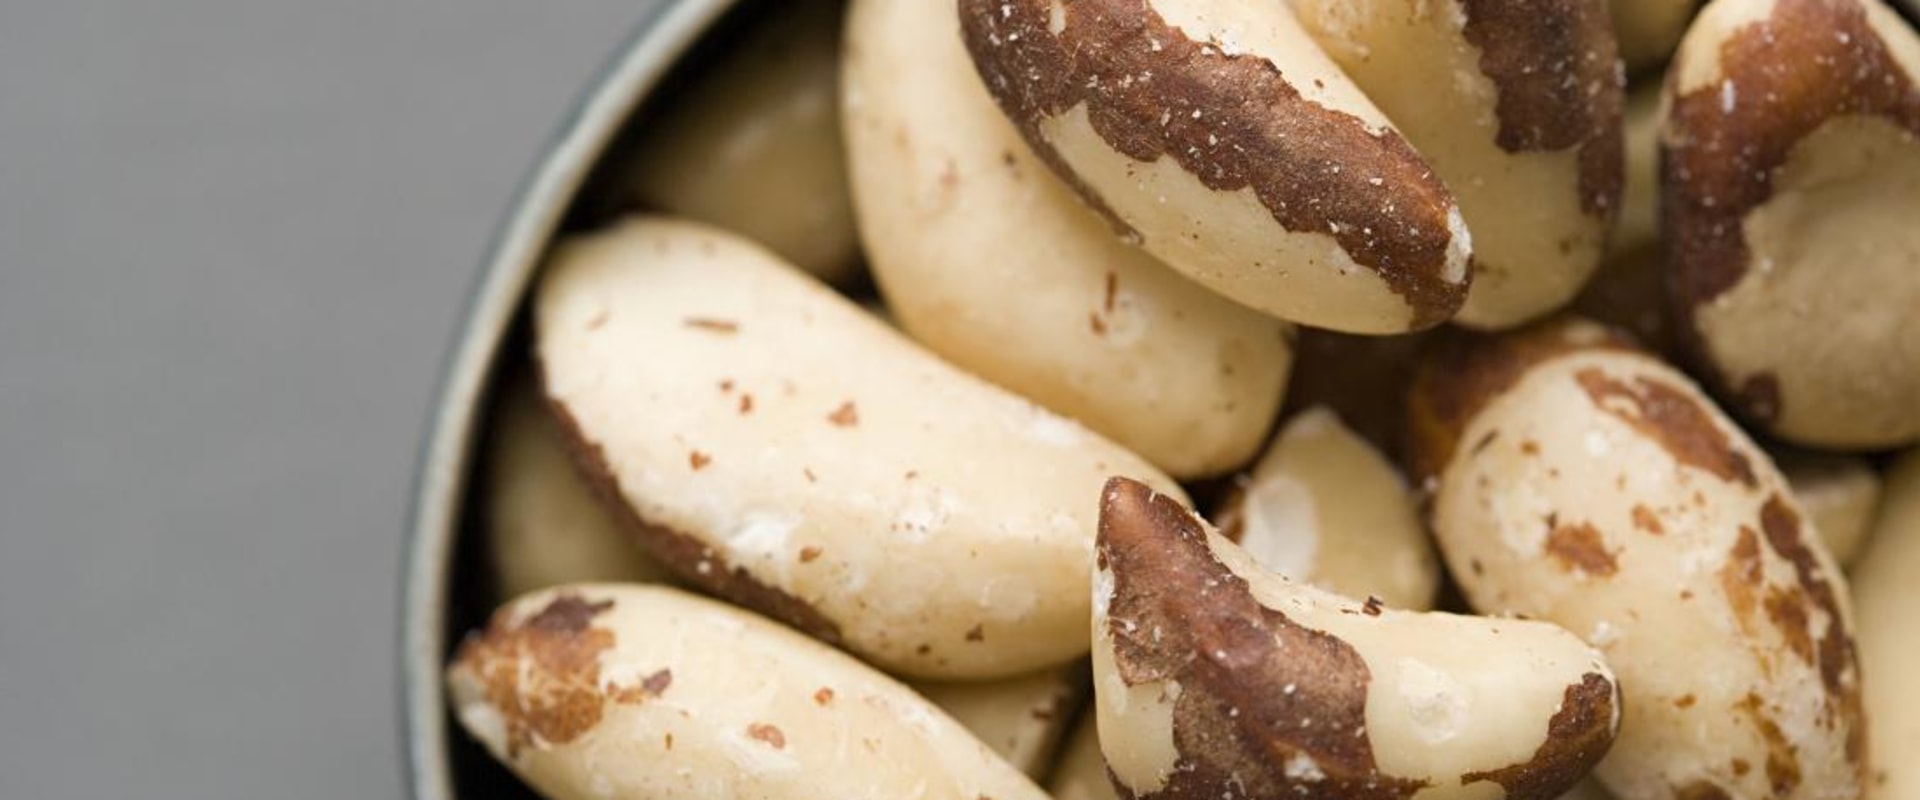 What happens if i ate too many brazil nuts?